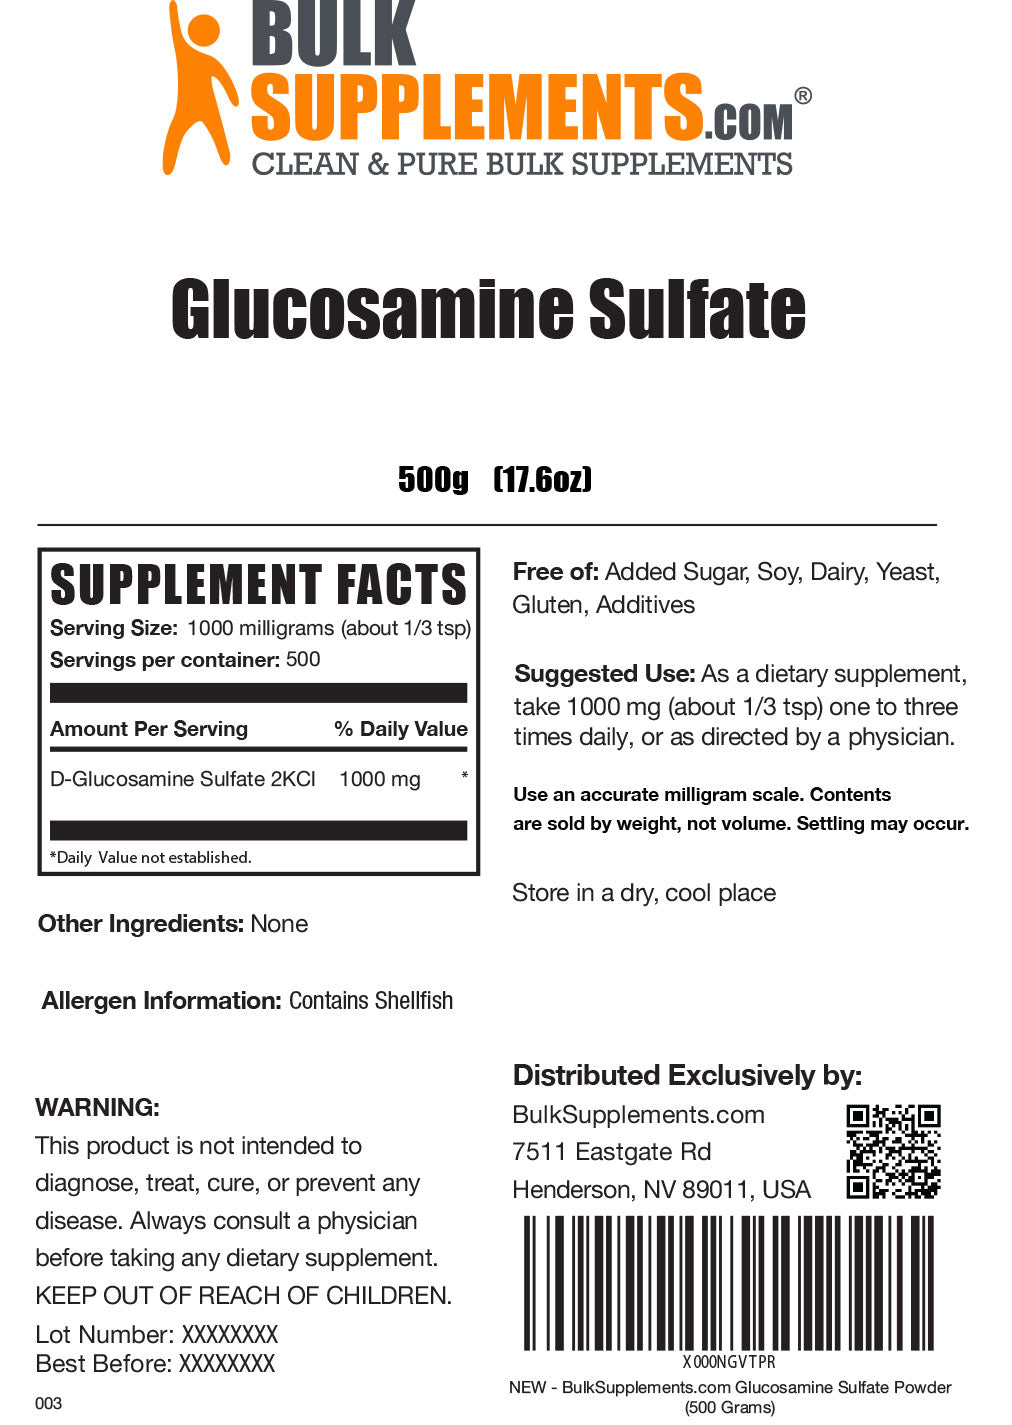 Glucosamine Sulfate supplement facts 500g